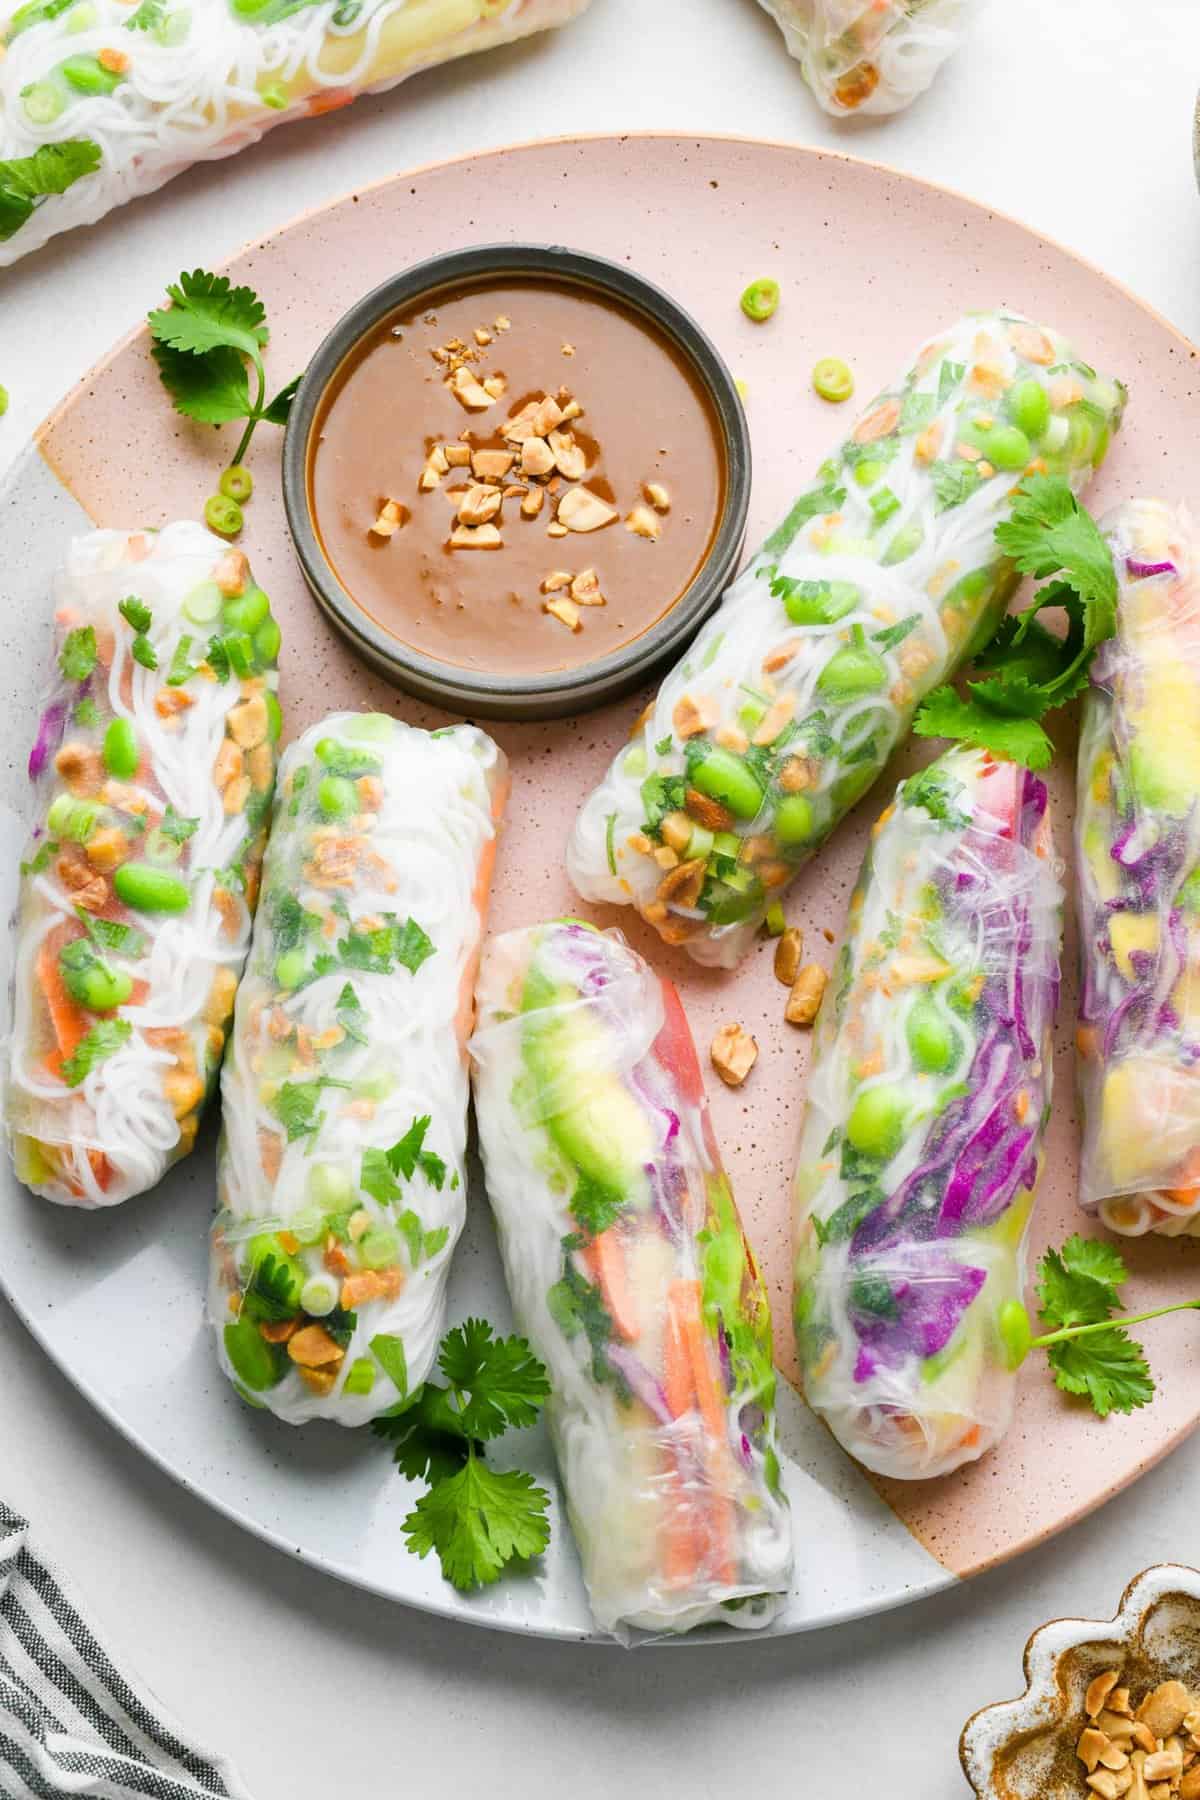 6 Spring Rolls on a plate with a small bowl of peanut sauce